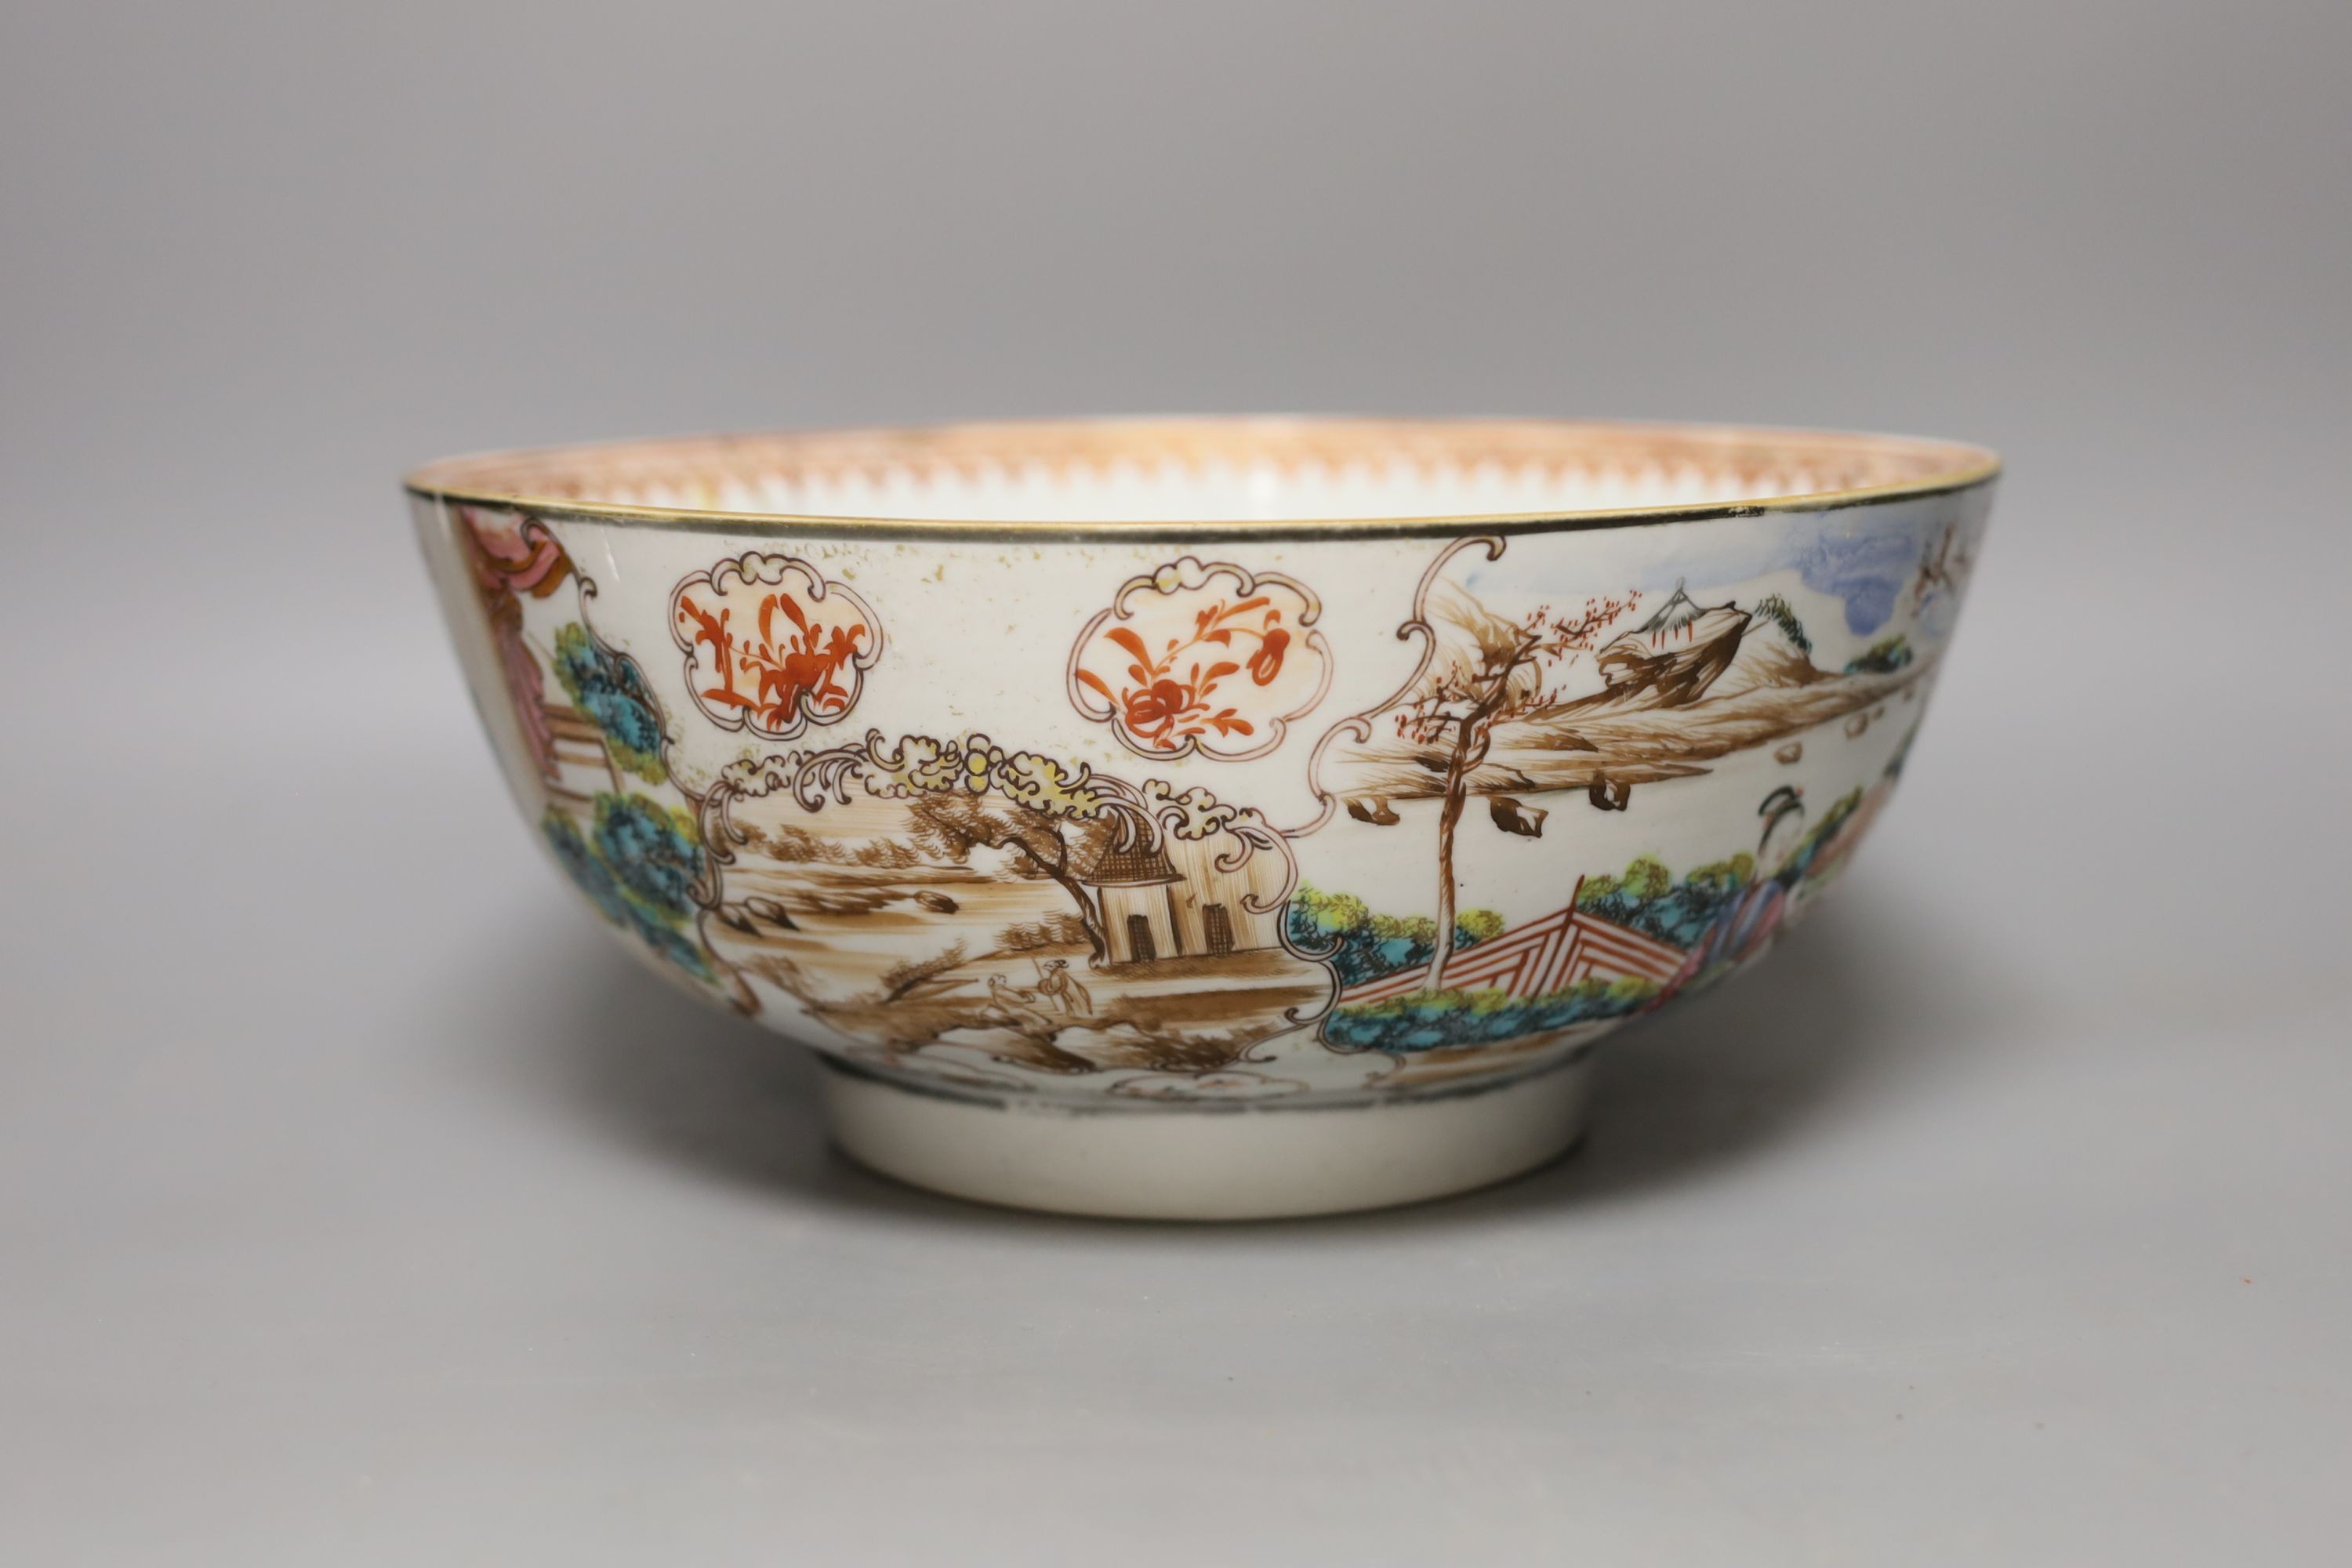 An 18th century Chinese export famille rose punch bowl (with historic damage and riveted repair) - Image 2 of 4